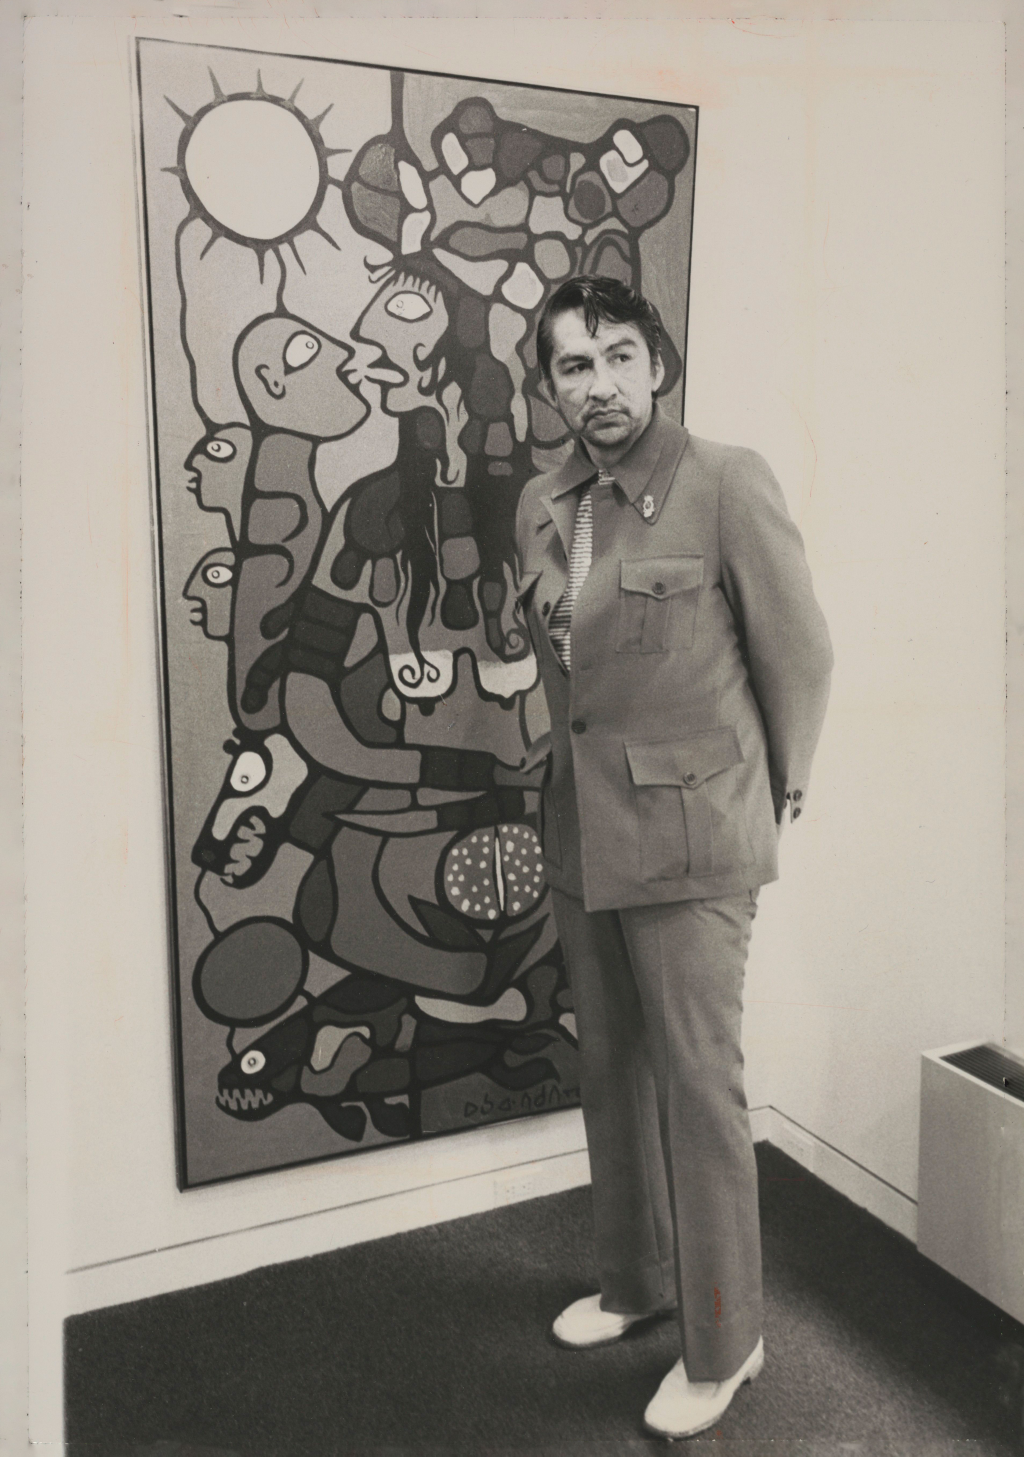 Photograph of Morrisseau posing in front of a painting